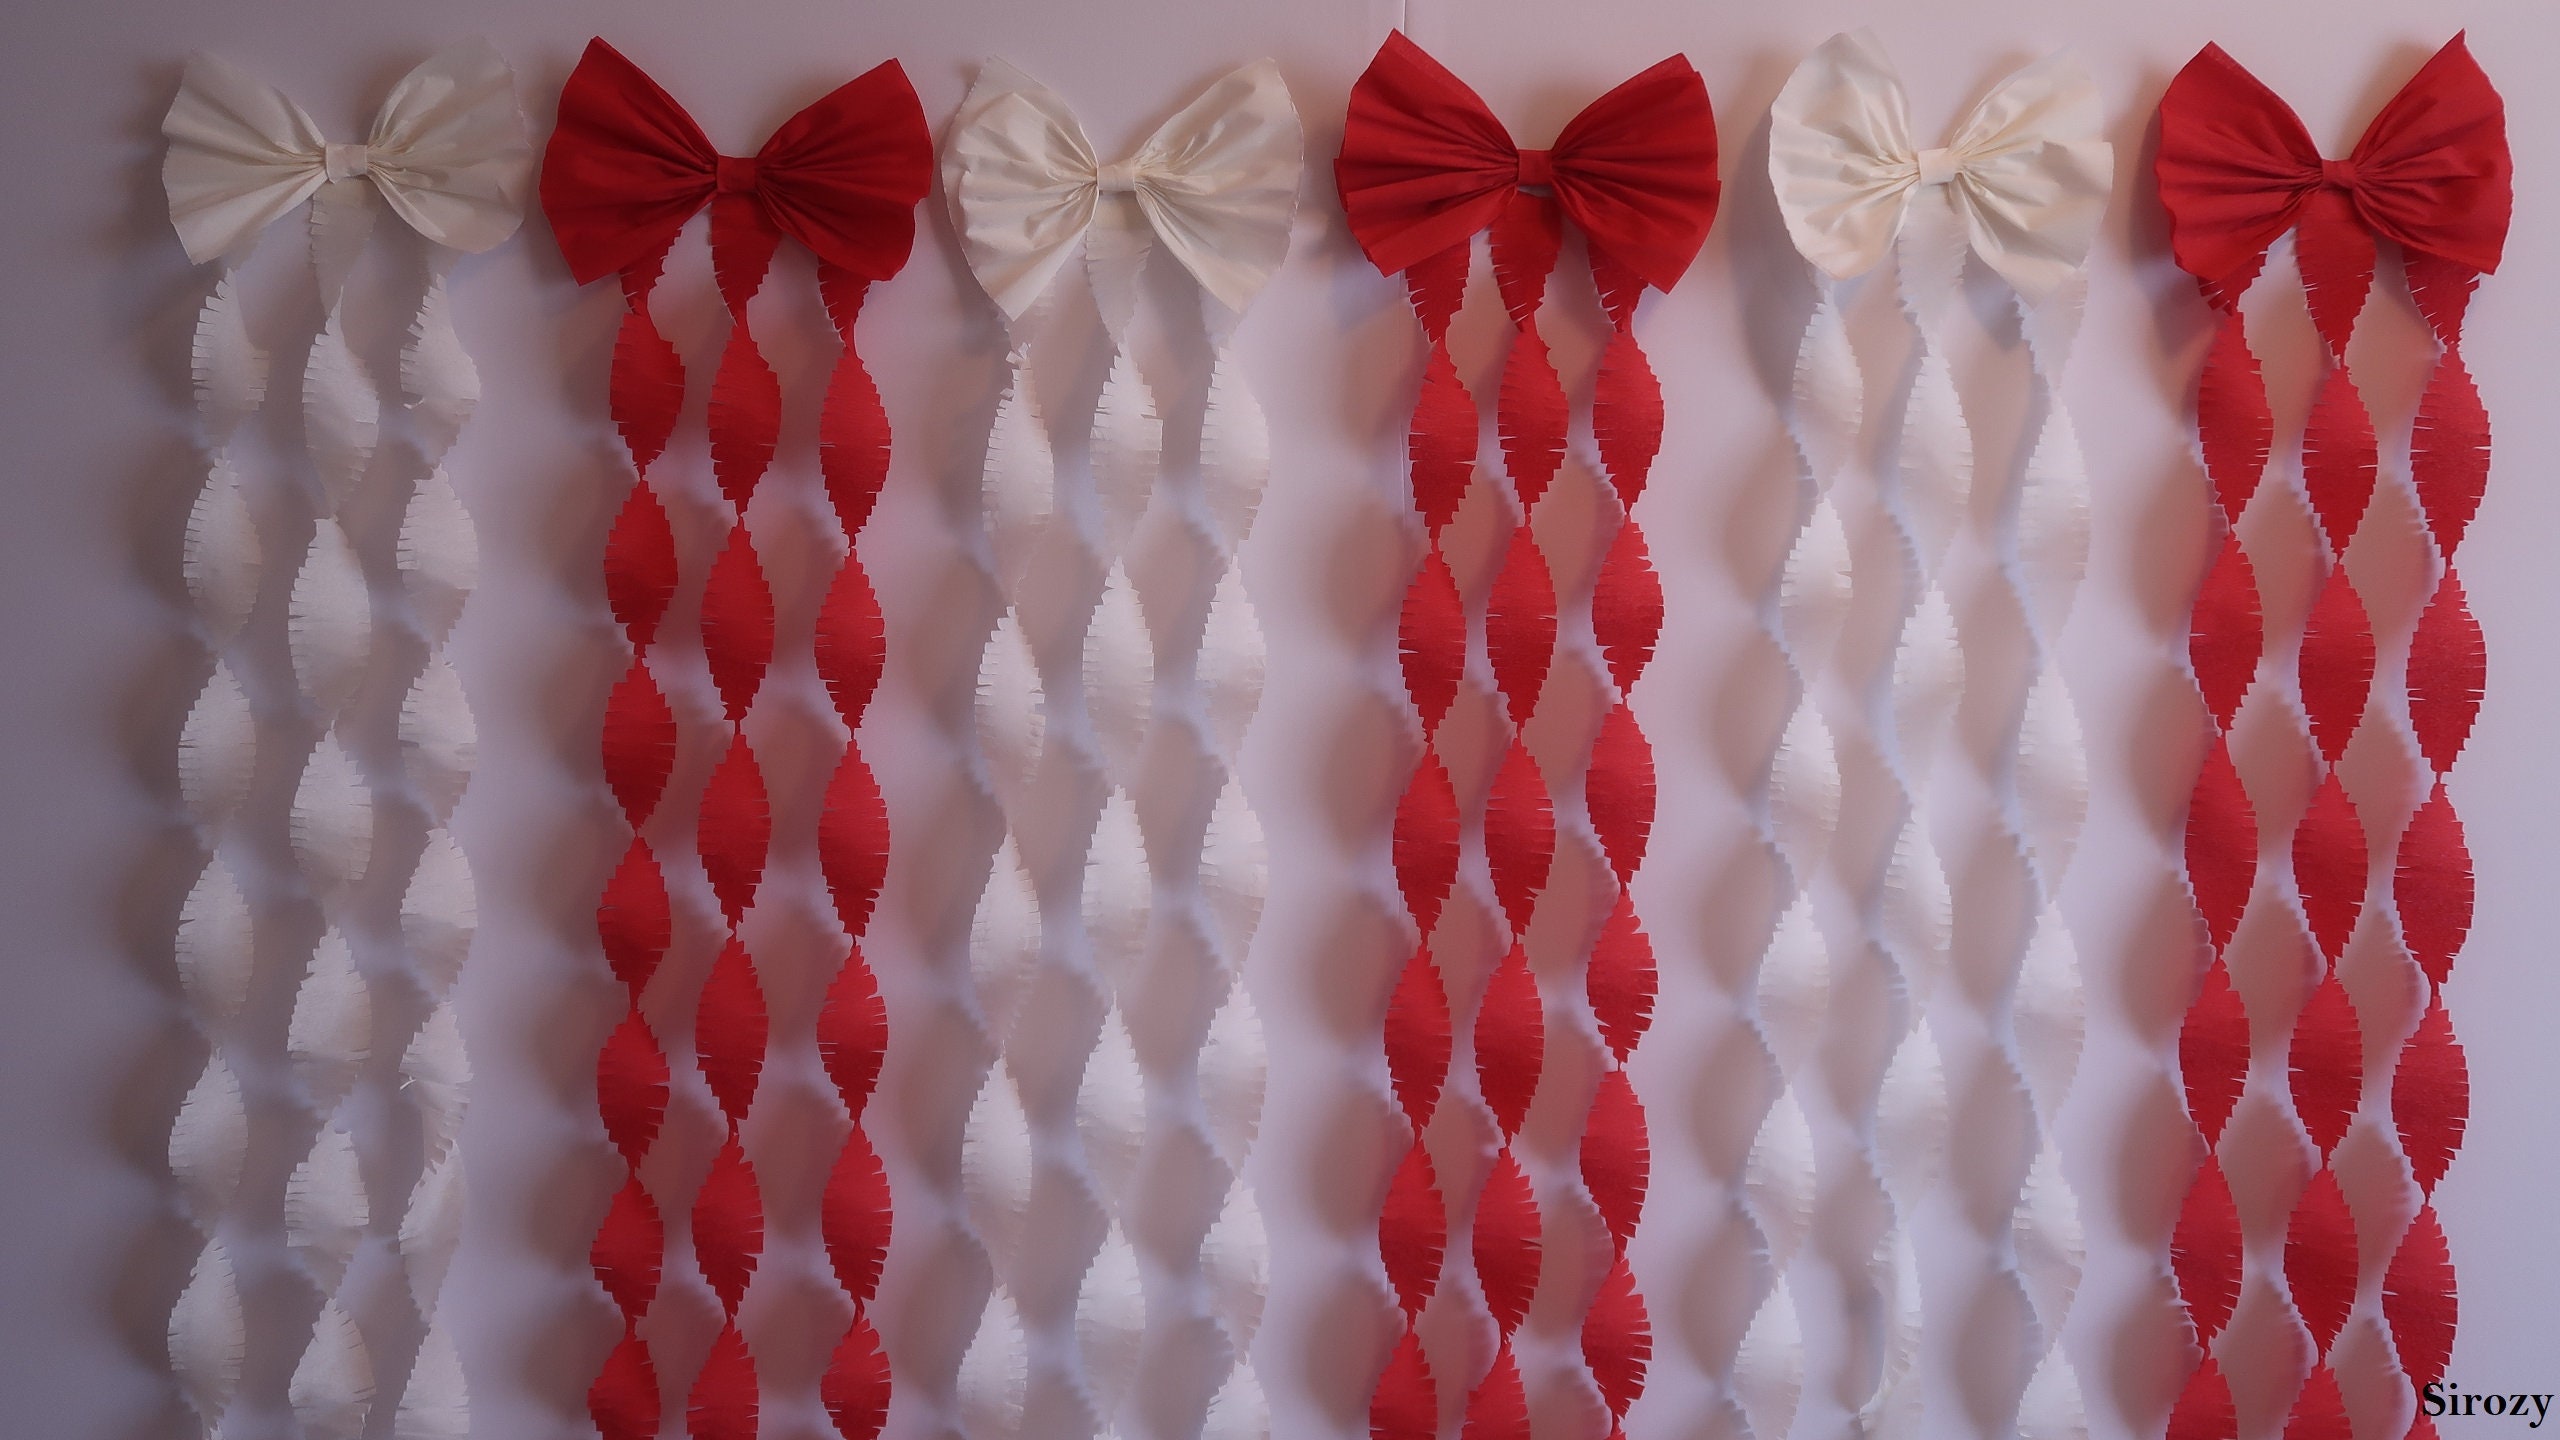 Red and White Crepe Paper Streamers - 6 Rolls Party Streamers for  Valentine's Day,Wedding,Birthdy Party Decorations